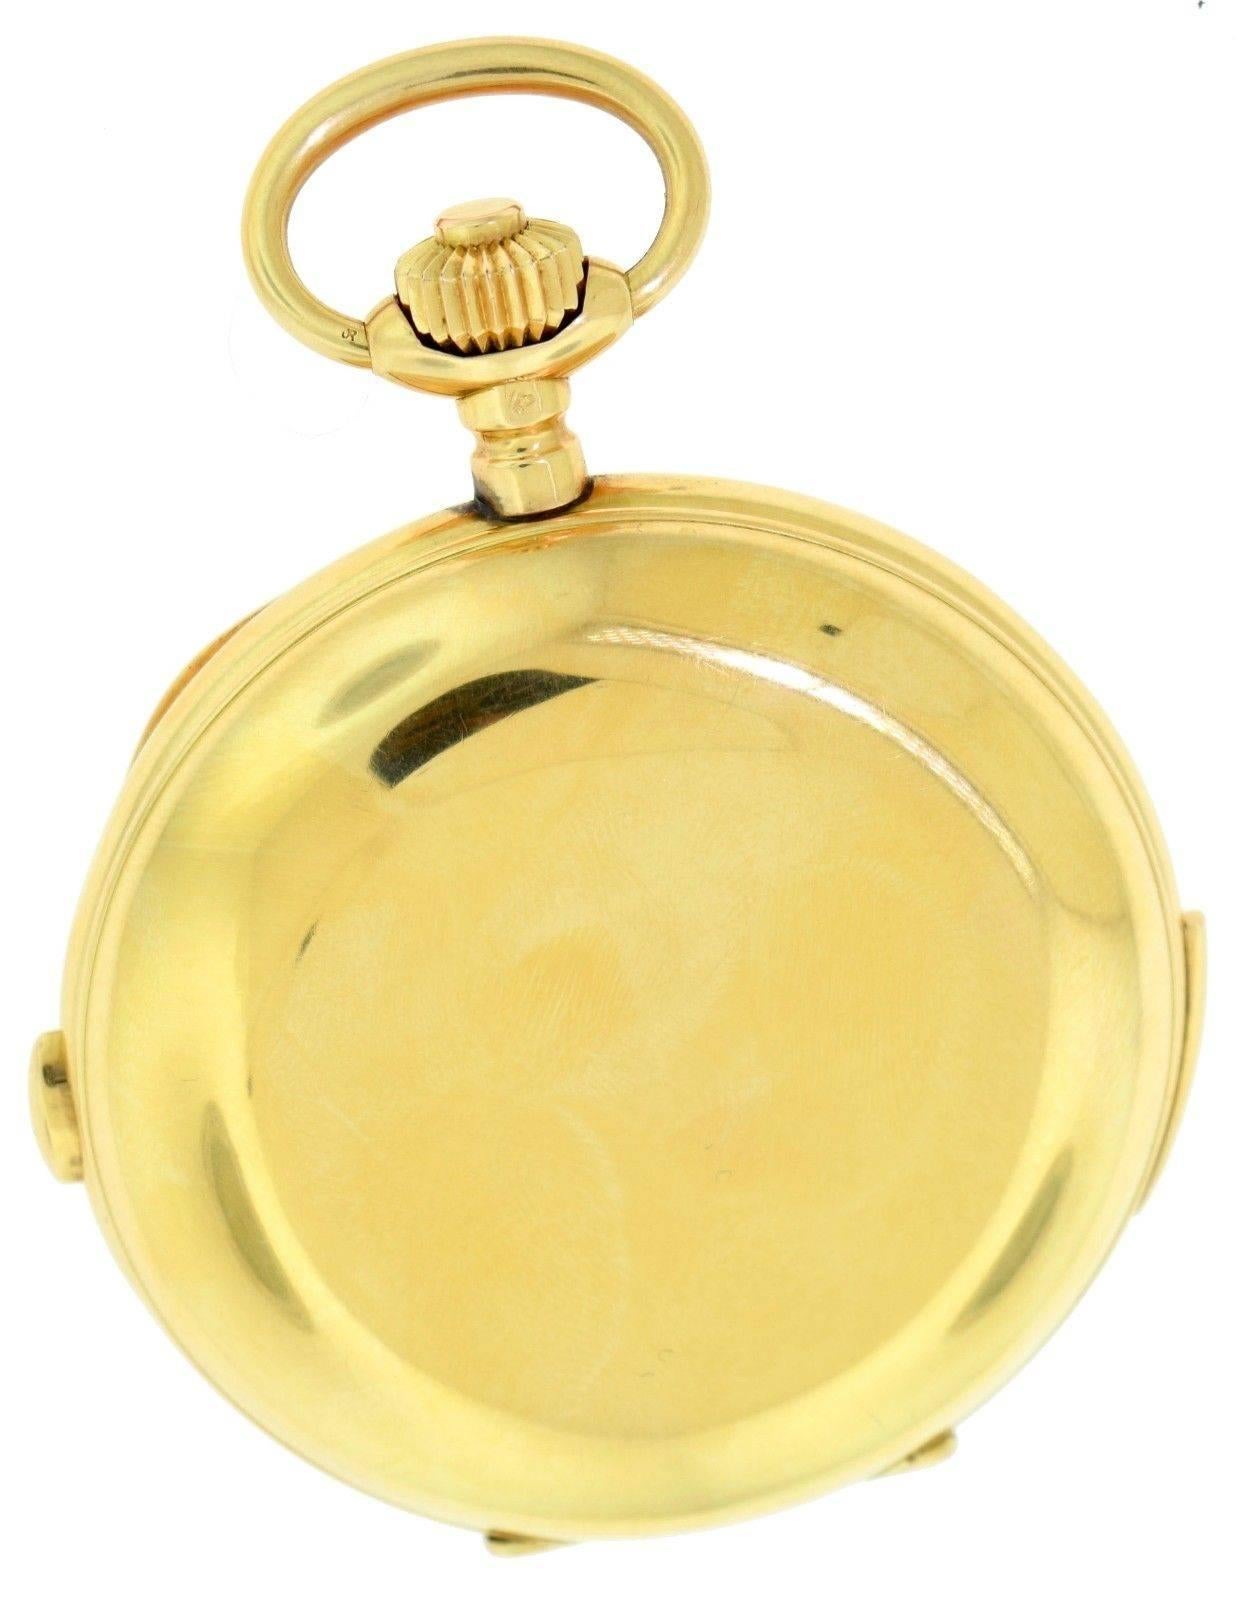 Vintage Swiss 18k Yellow Gold Quarter Repeater Pocket Watch For Sale 2